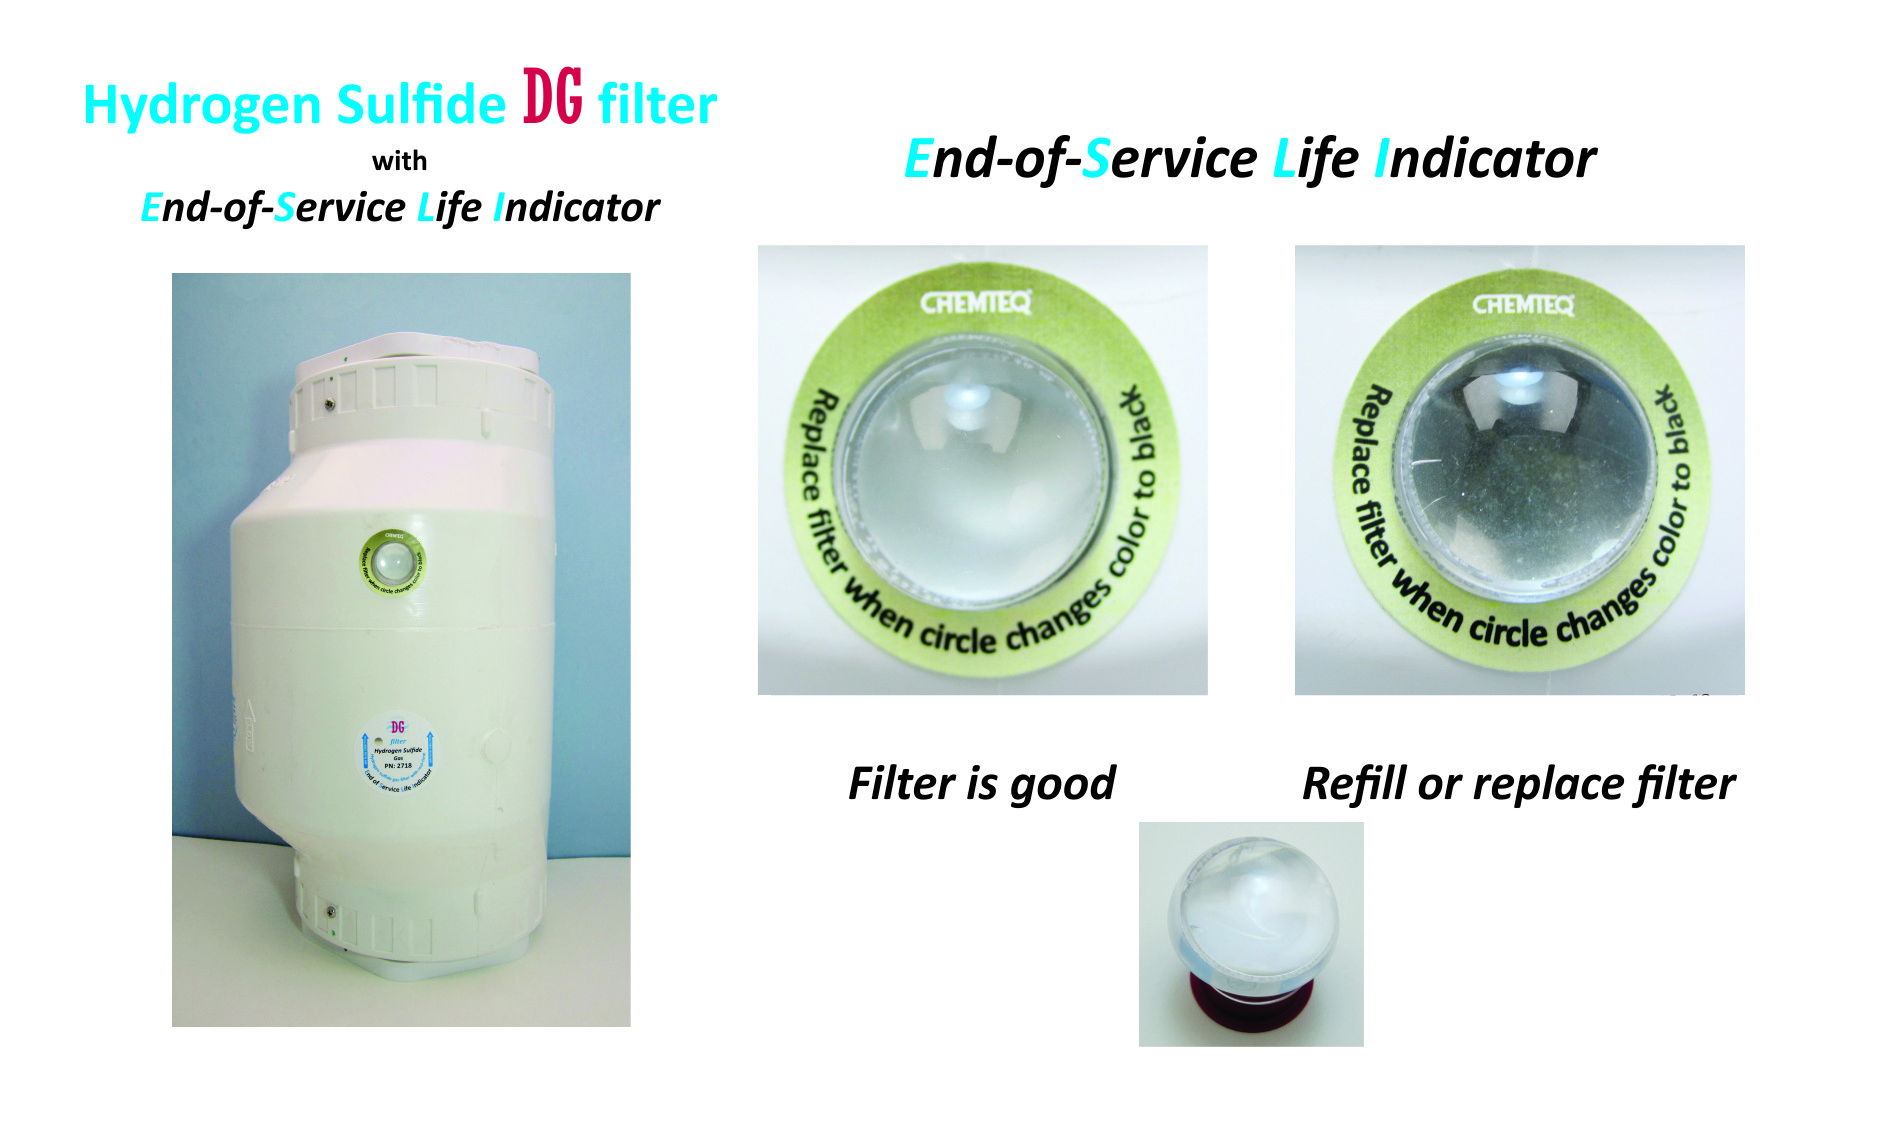 Hydrogen Sulfide DG FILTER-ESLI-2718 Filter with end of service life indicator. Suitable for chemical processes and reactor vents.